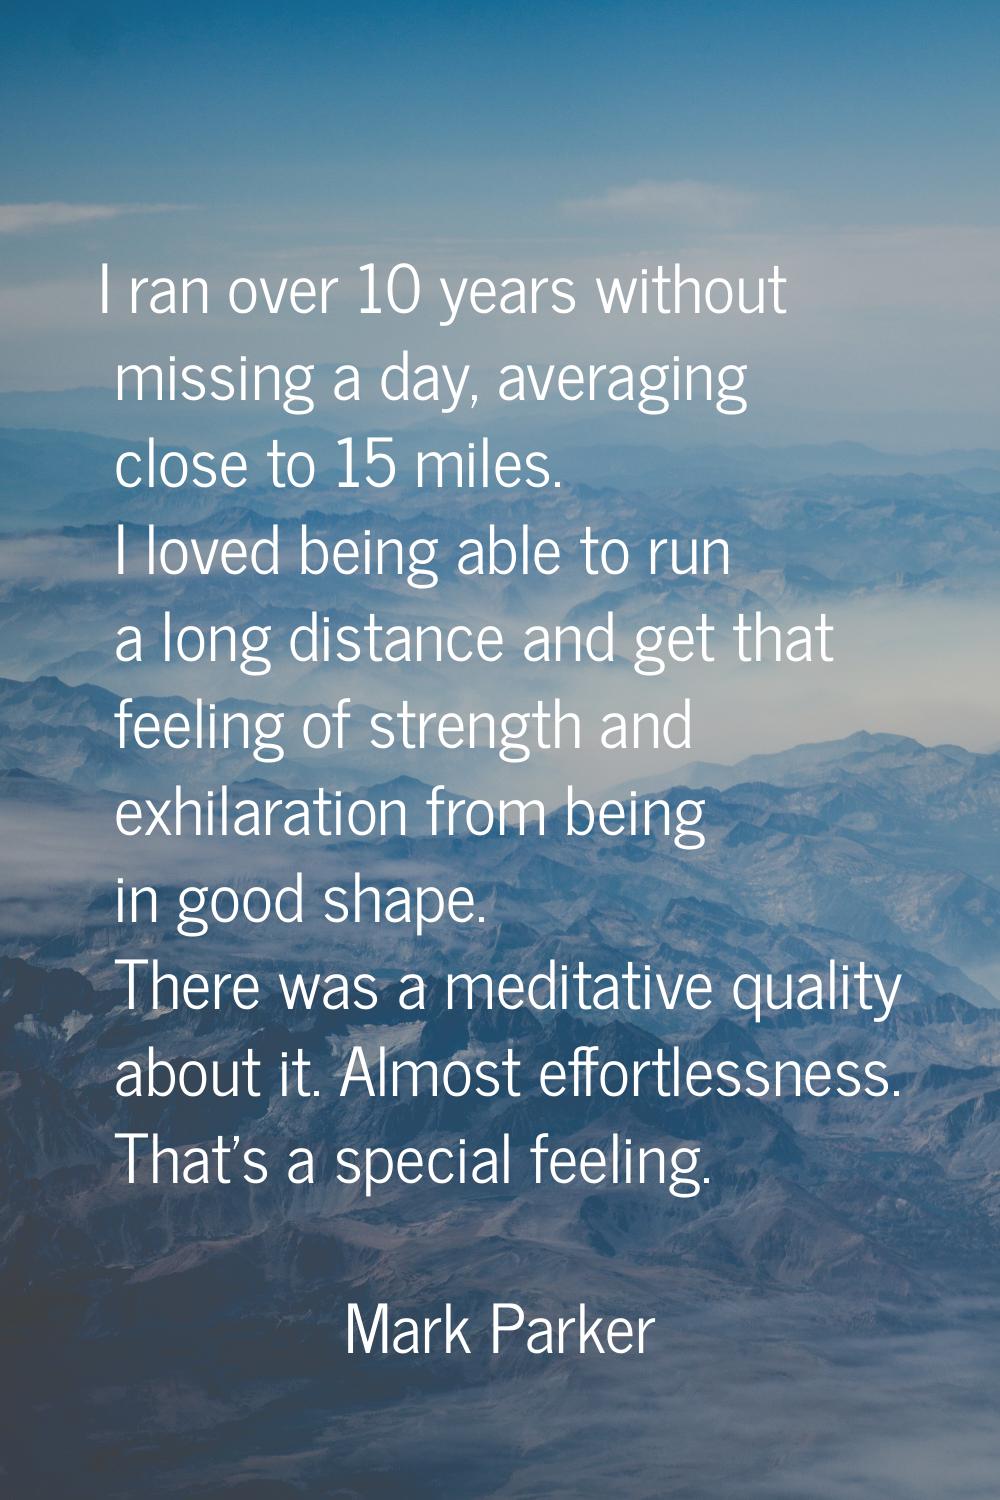 I ran over 10 years without missing a day, averaging close to 15 miles. I loved being able to run a